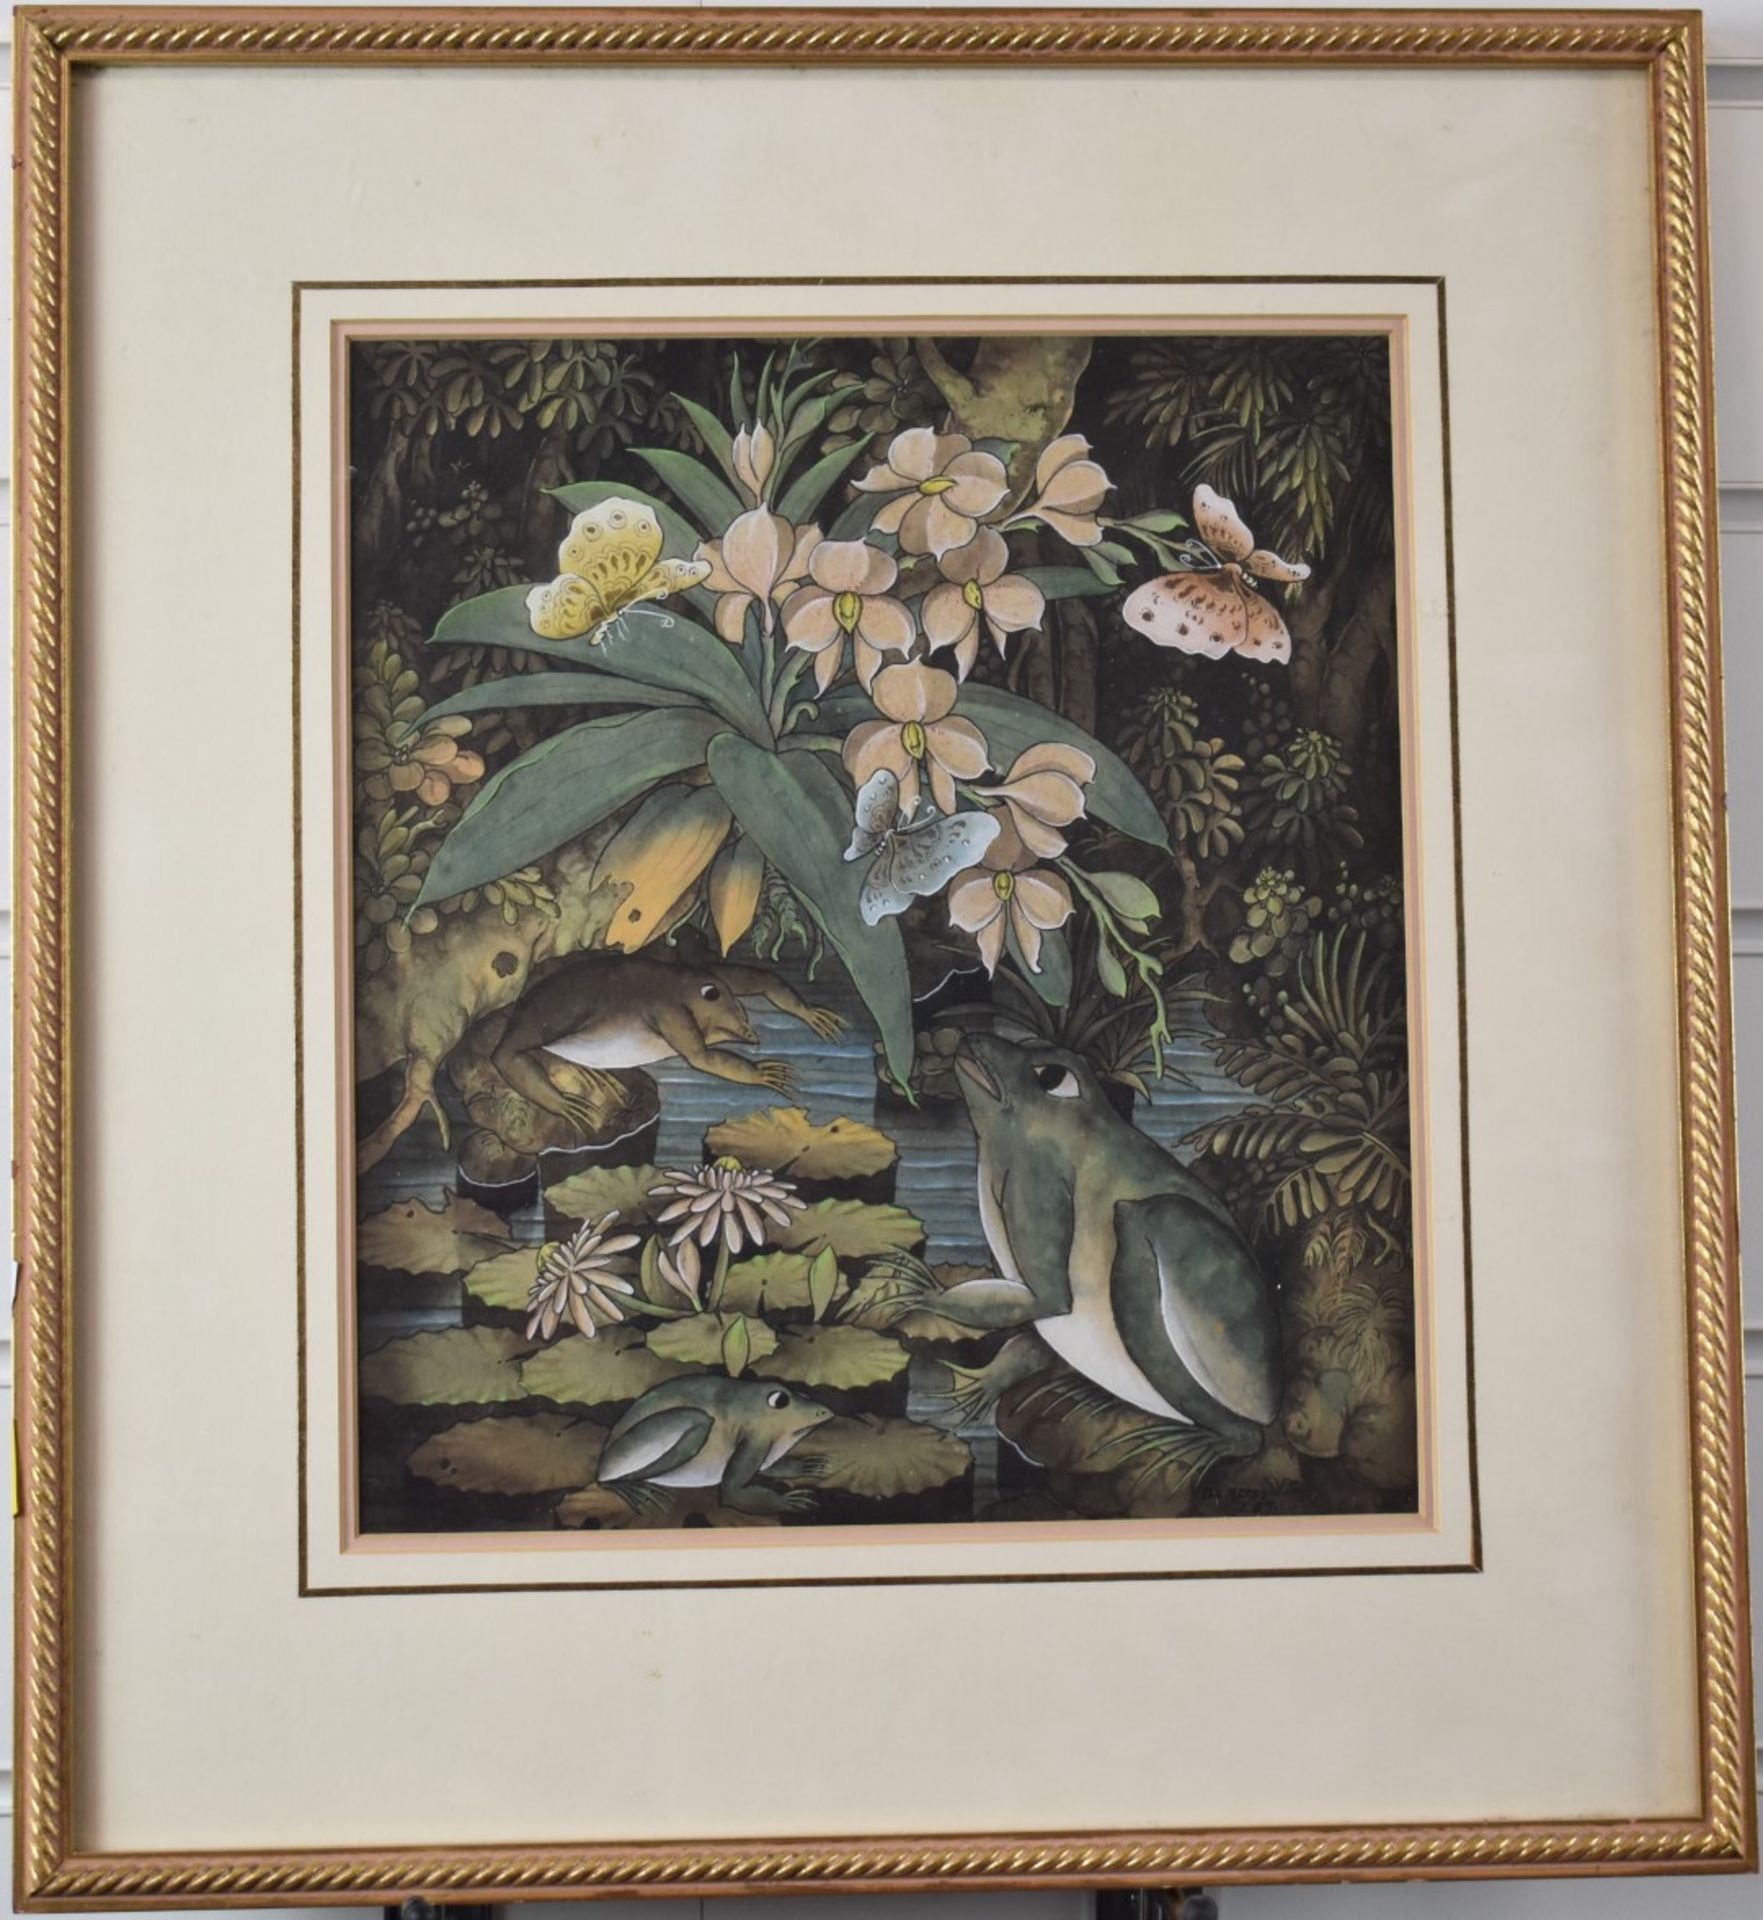 Watercolour of frogs, butterflies and flowers, signed lower right possibly I W Meres and dated 87, - Image 2 of 4